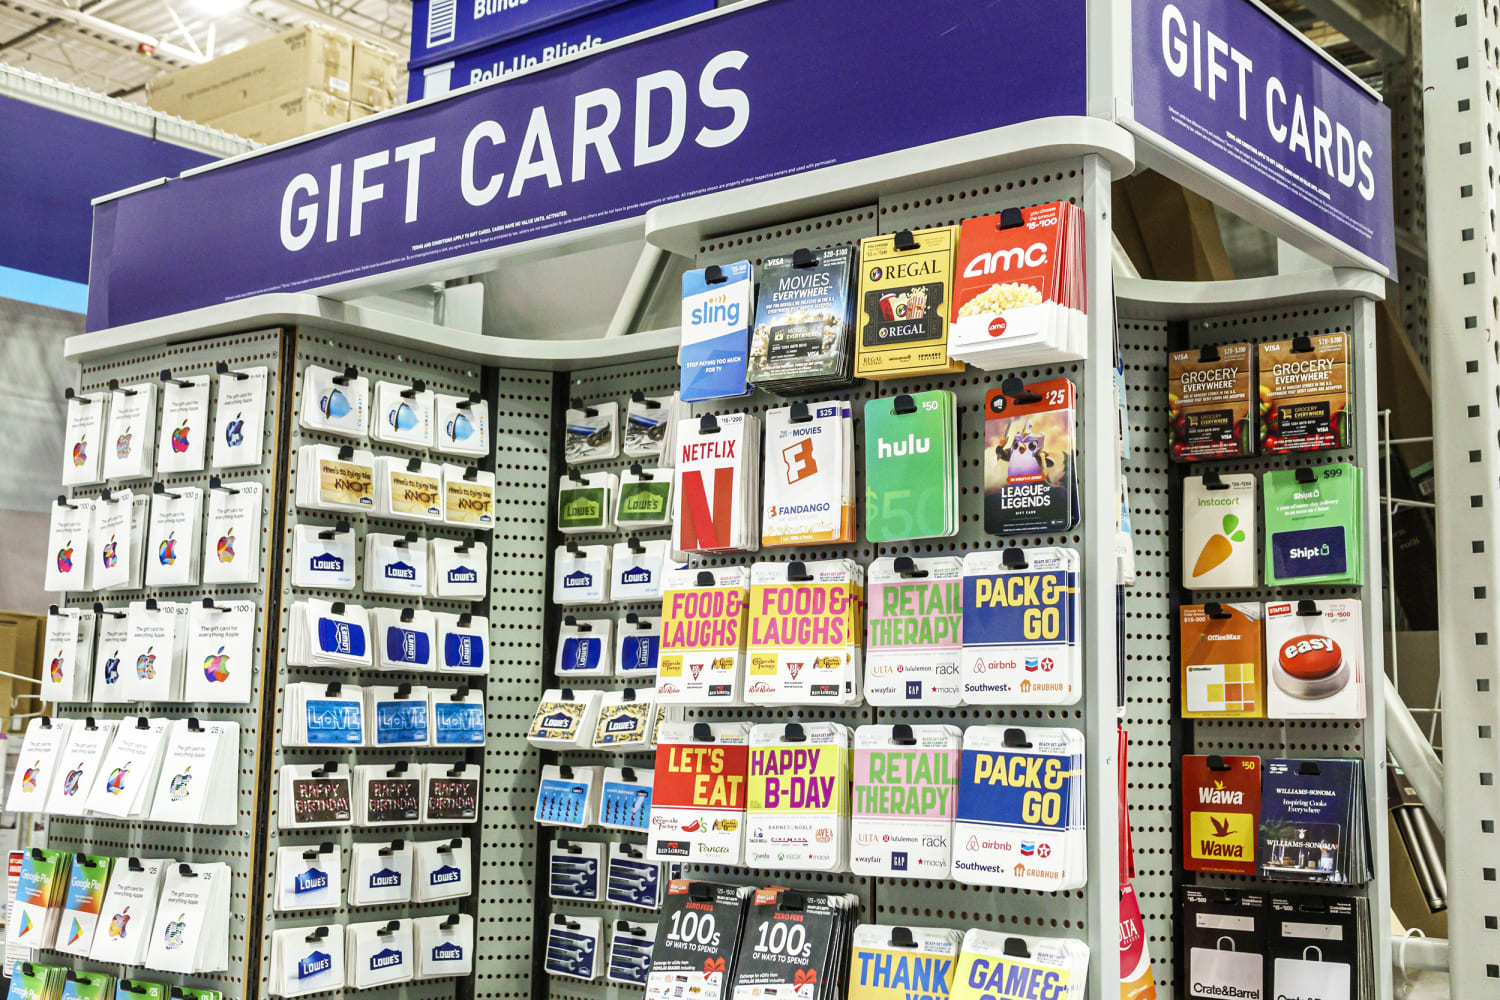 What You Need to Know about Electronic Visa Gift Cards | Giftcards.com